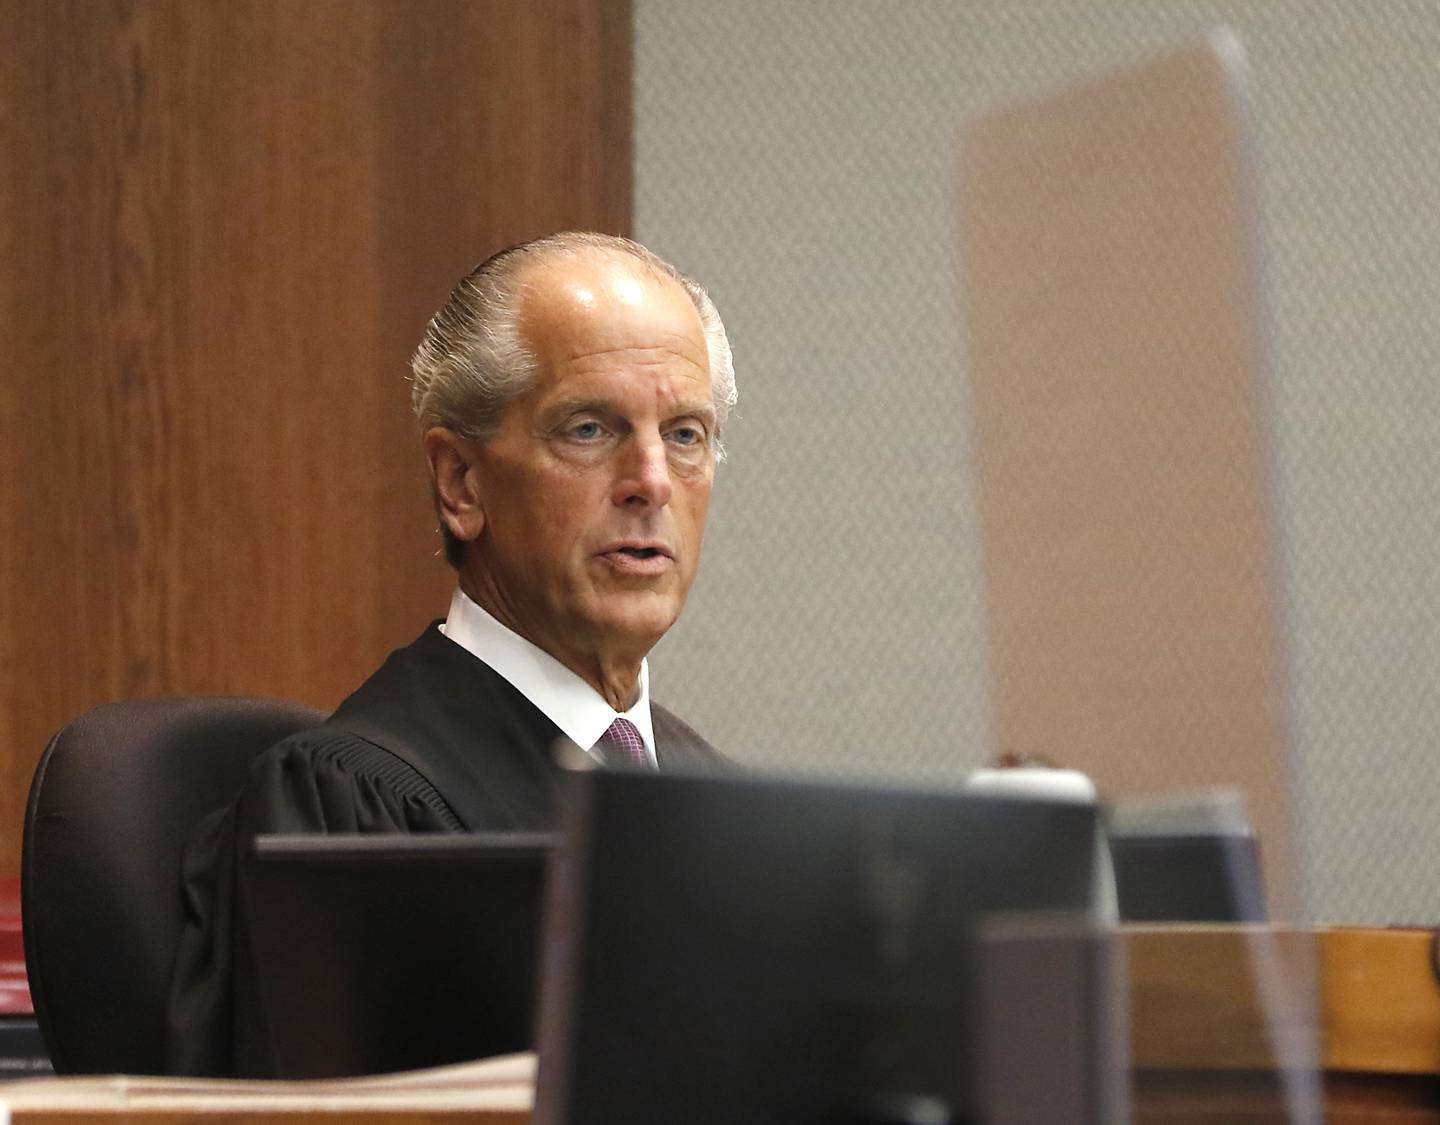 Judge Michael Coppedge rules on a motion during the trial of Robert J. Gould, 56, on Monday, Nov. 14, 2022. Gould, who was on McHenry County’s most wanted list when arrested in 2017, is accused of repeatedly sexually abusing two children throughout their childhoods beginning in 2001.